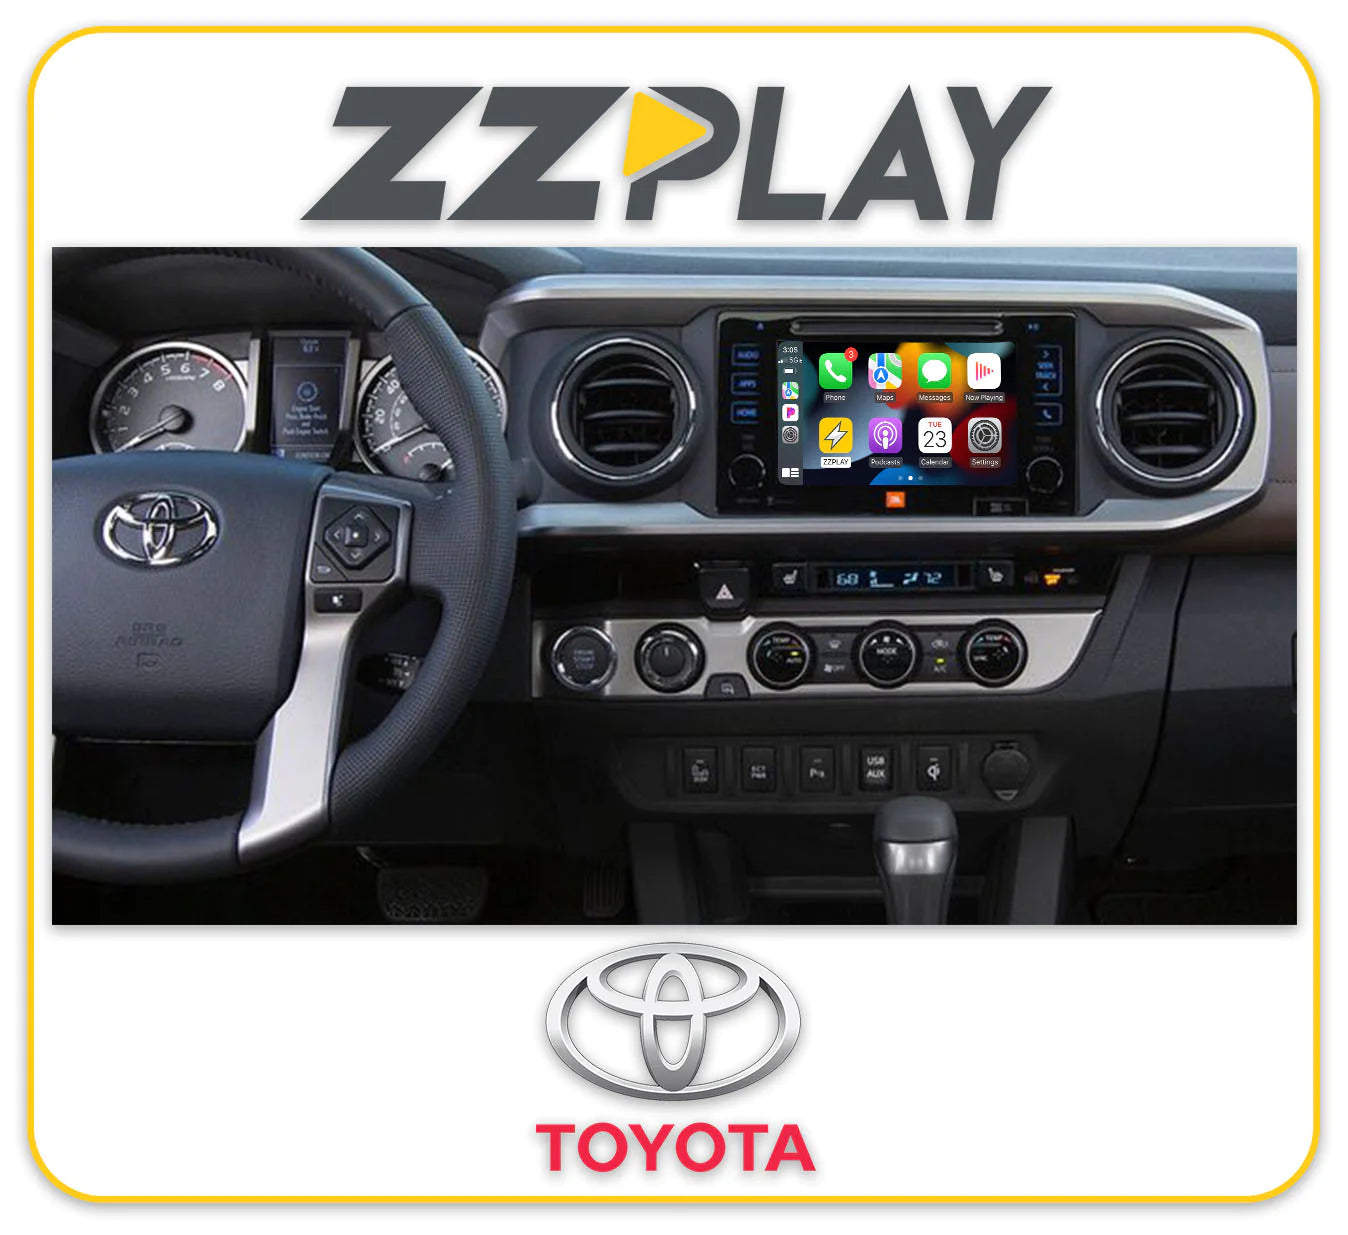 ZZ-2 ITZ-TOY Wireless CarPlay and Android Auto Interface | Toyota - Lockdown Security